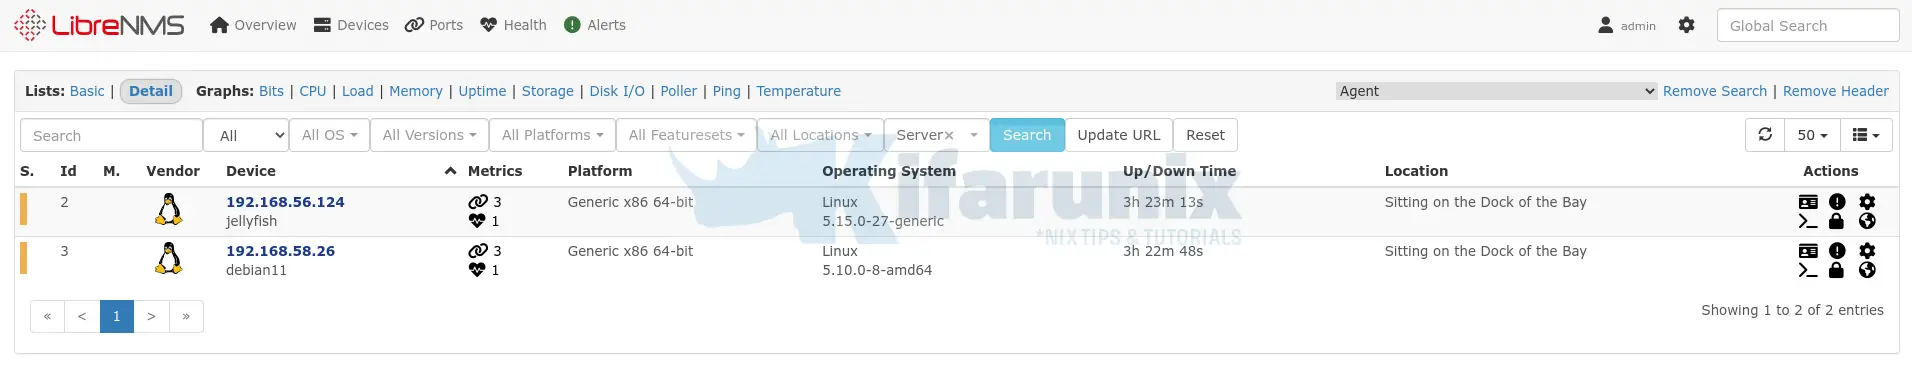 Add Hosts to LibreNMS Server for Monitoring